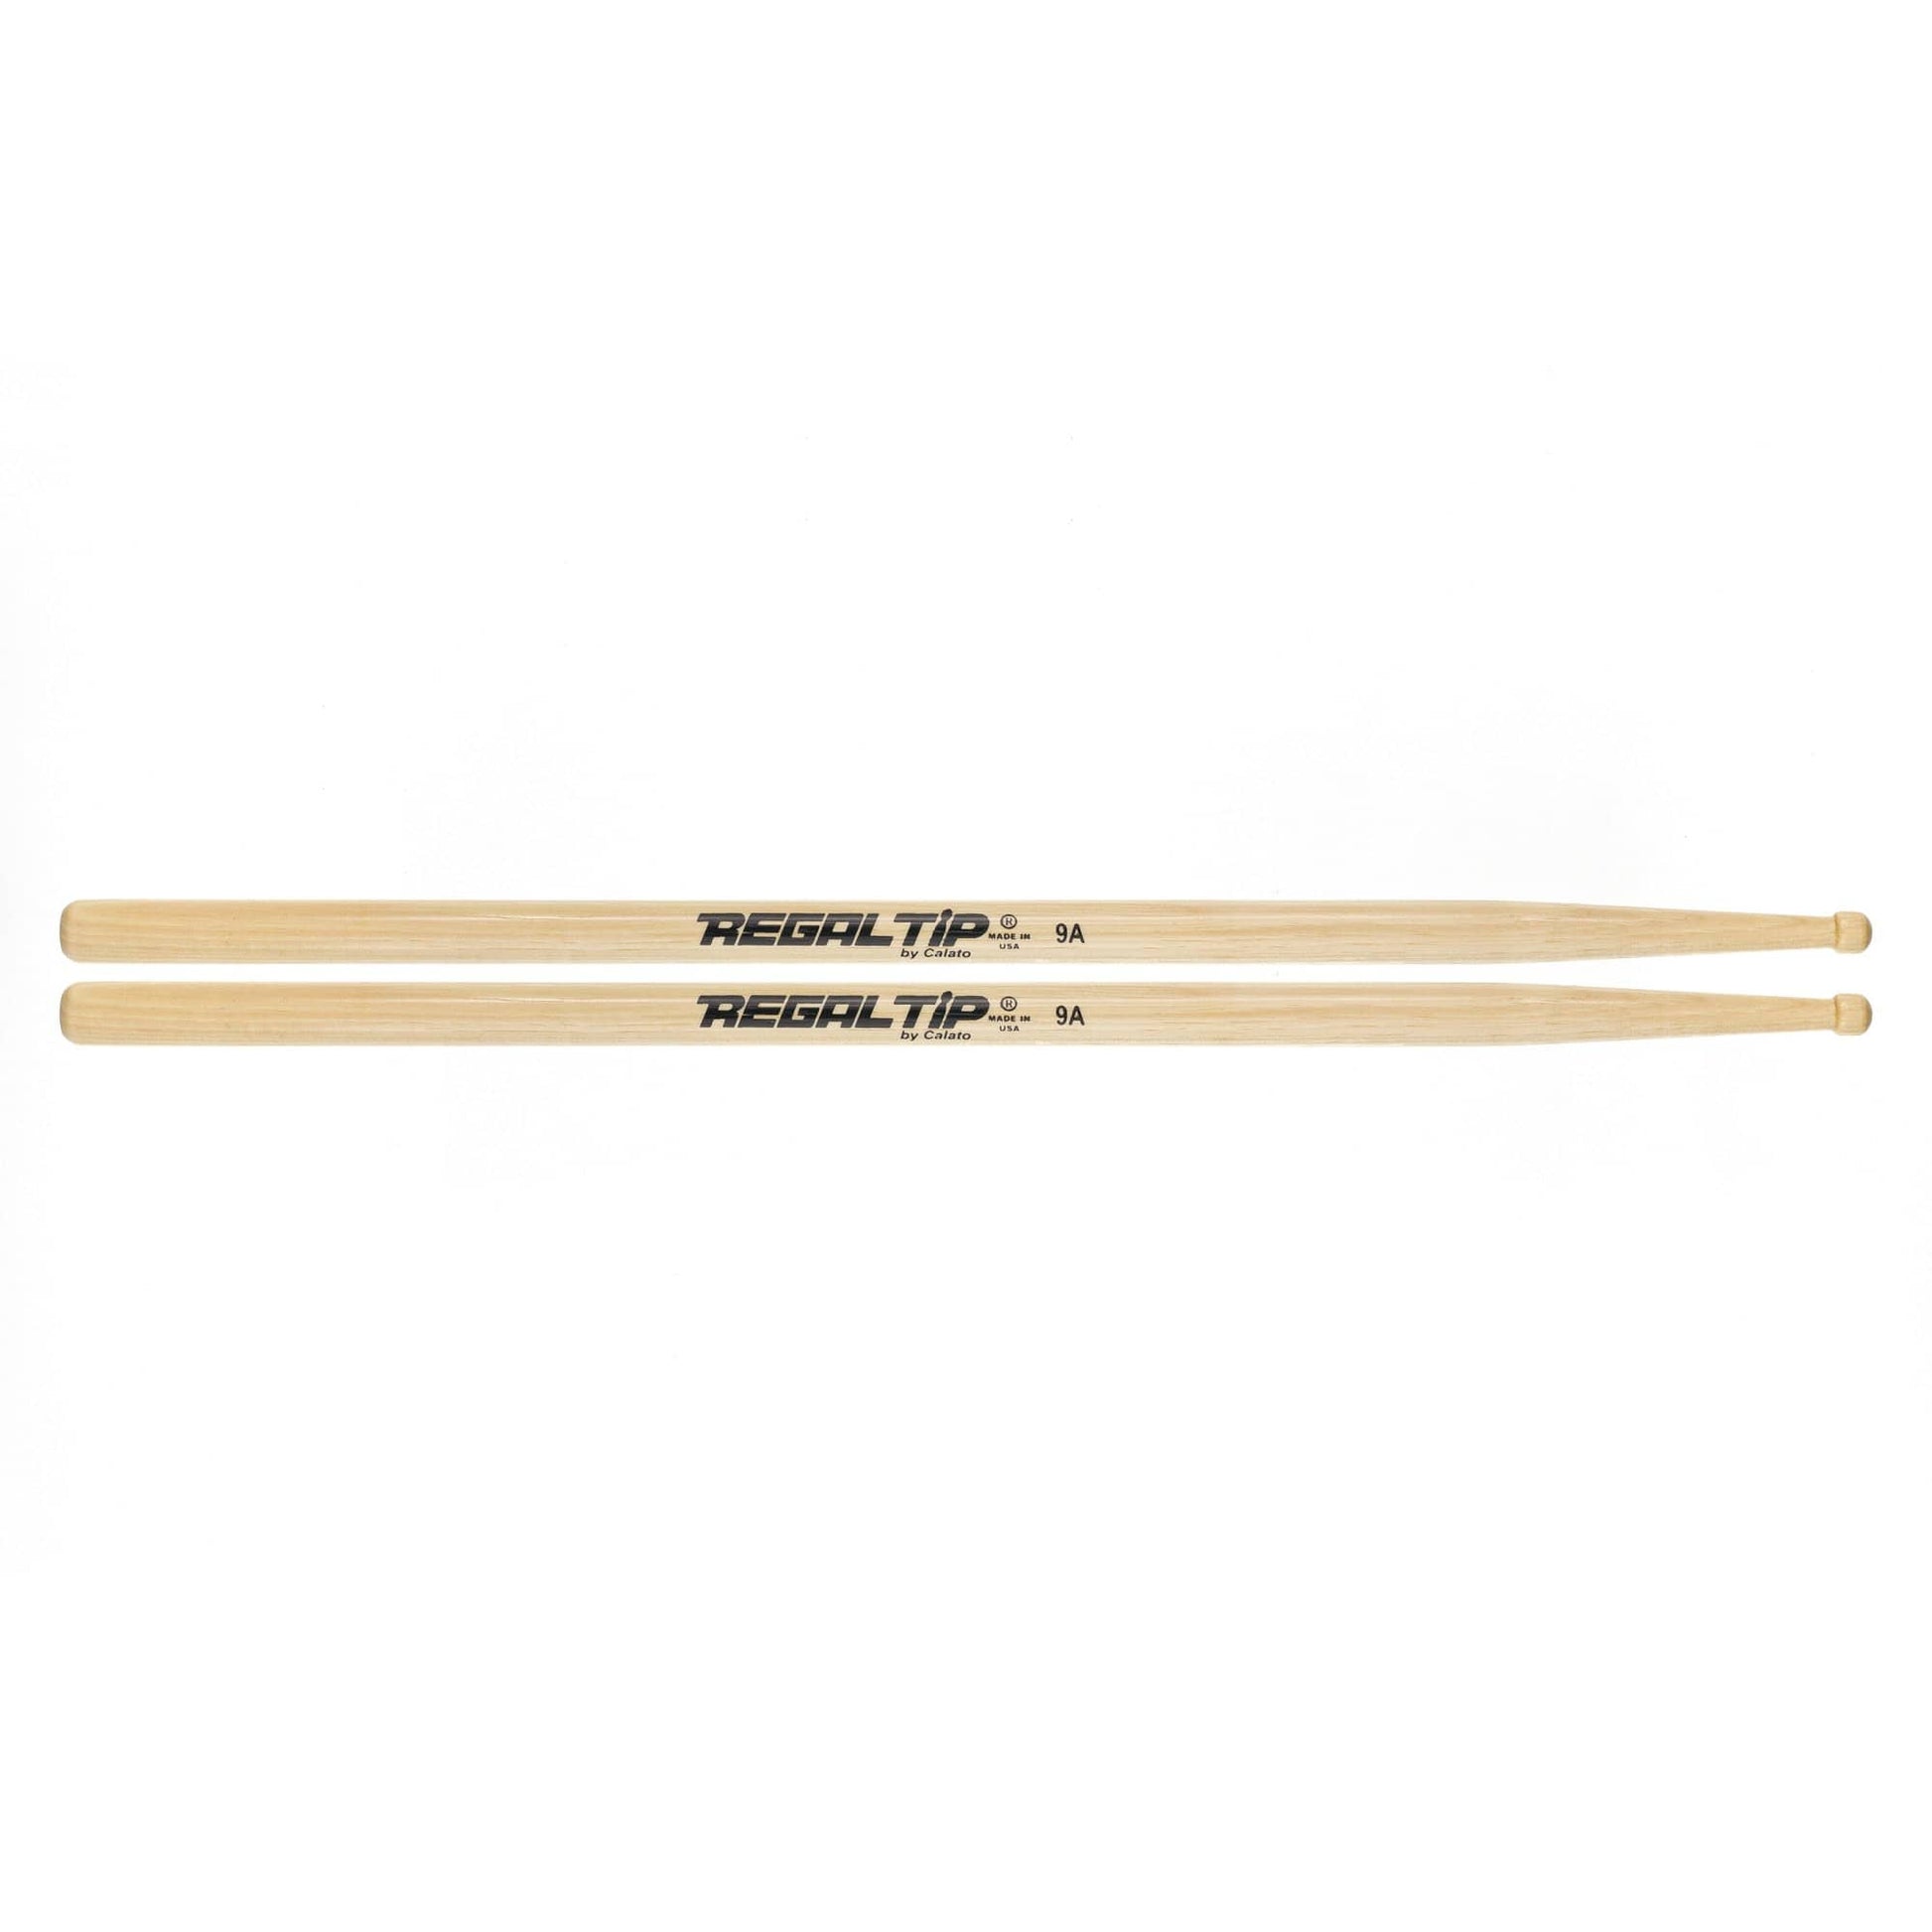 Regal Tip 9A Hickory Wood Tip Drum Sticks Drums and Percussion / Parts and Accessories / Drum Sticks and Mallets